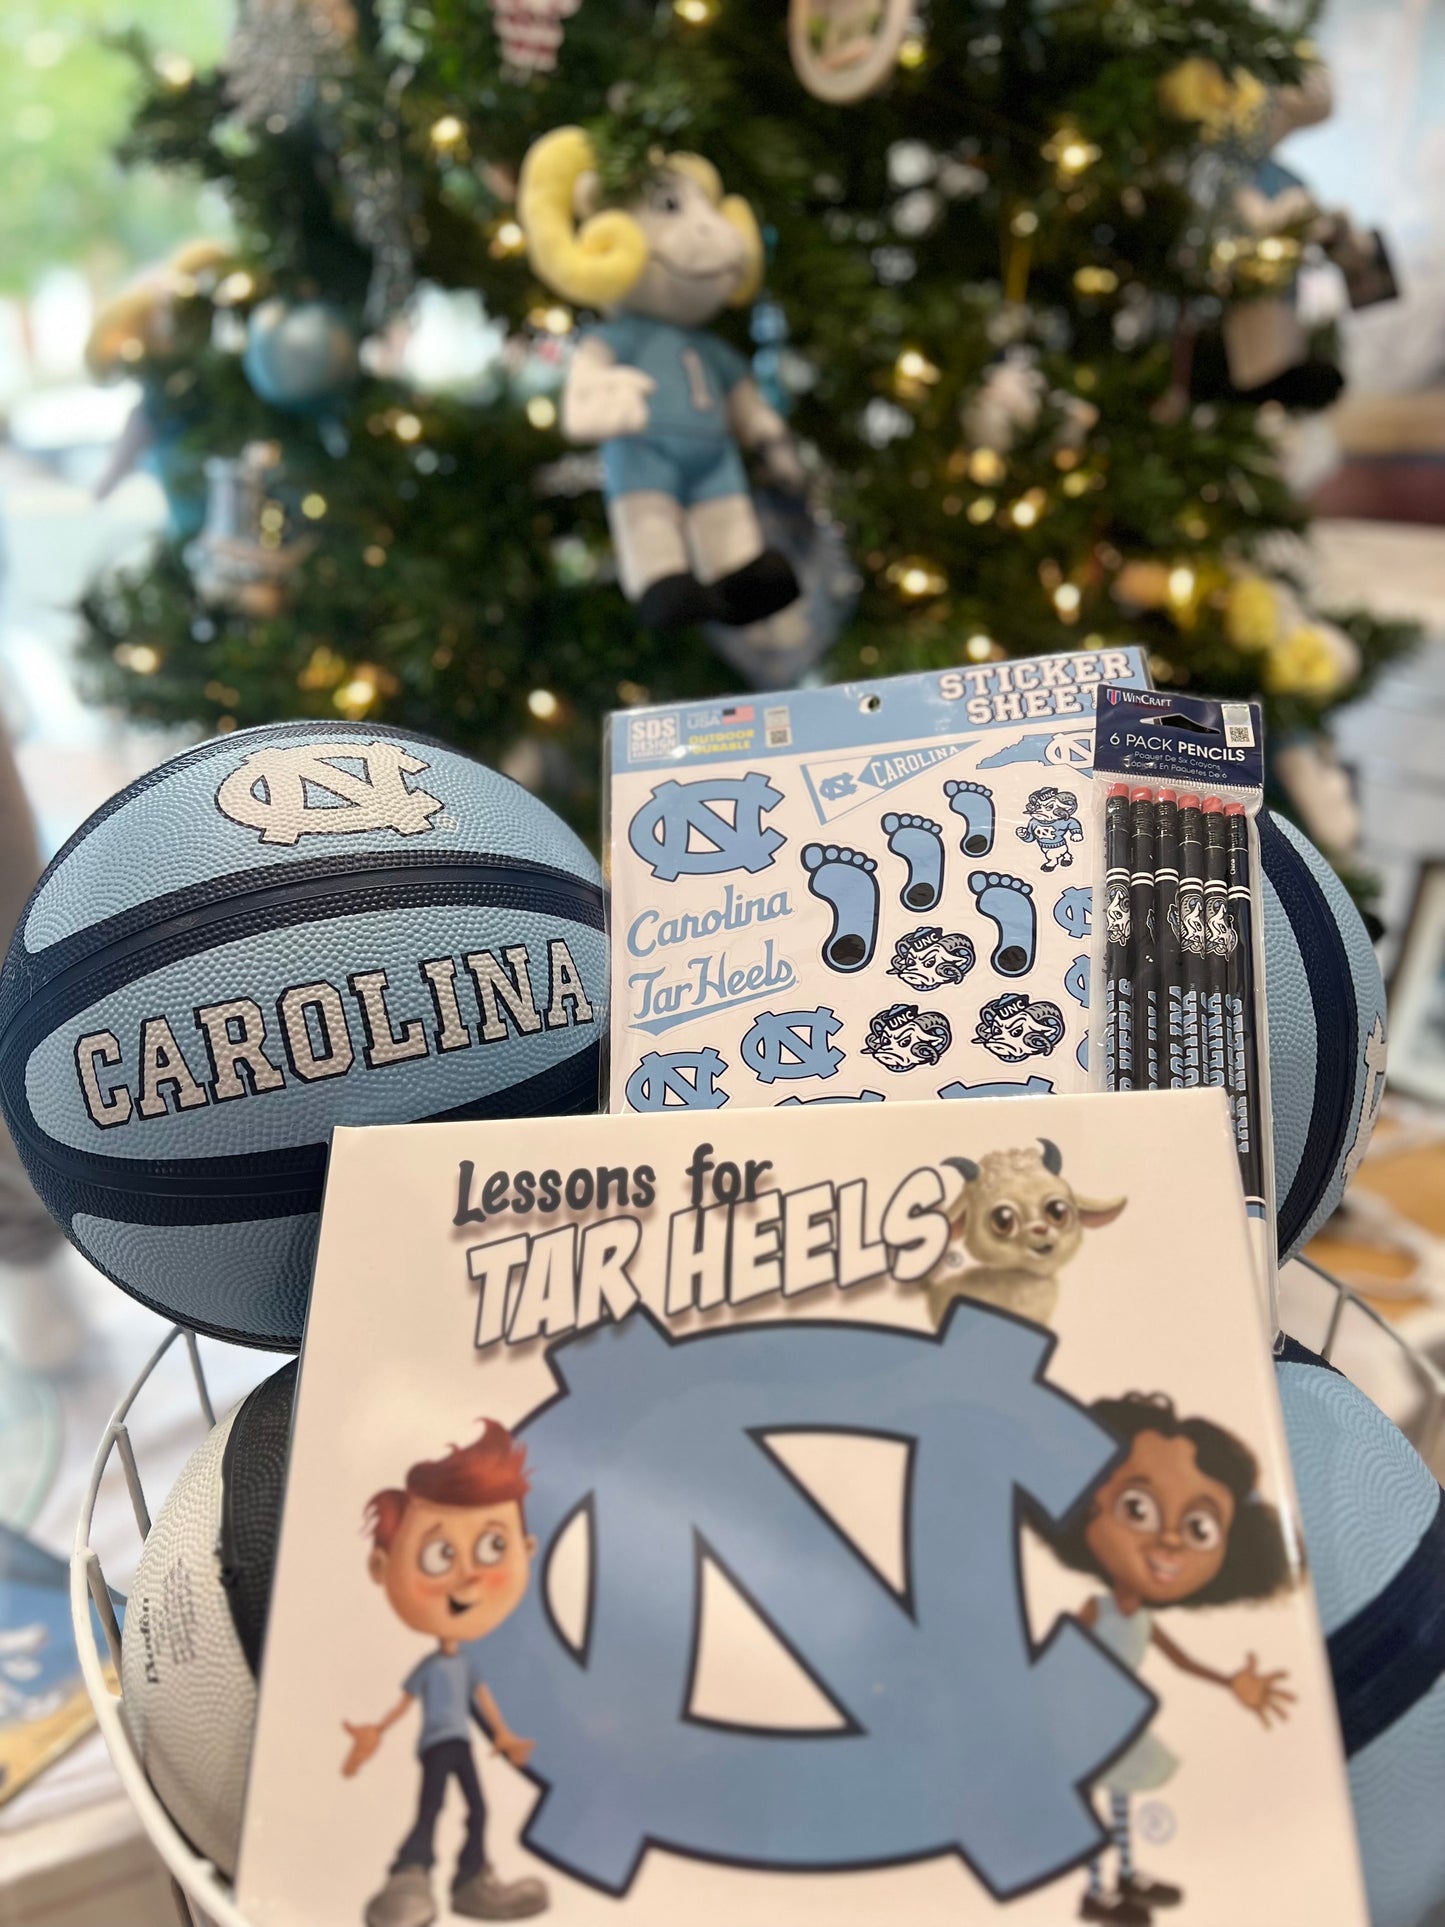 "Lessons for Tar Heels" UNC Children's Book